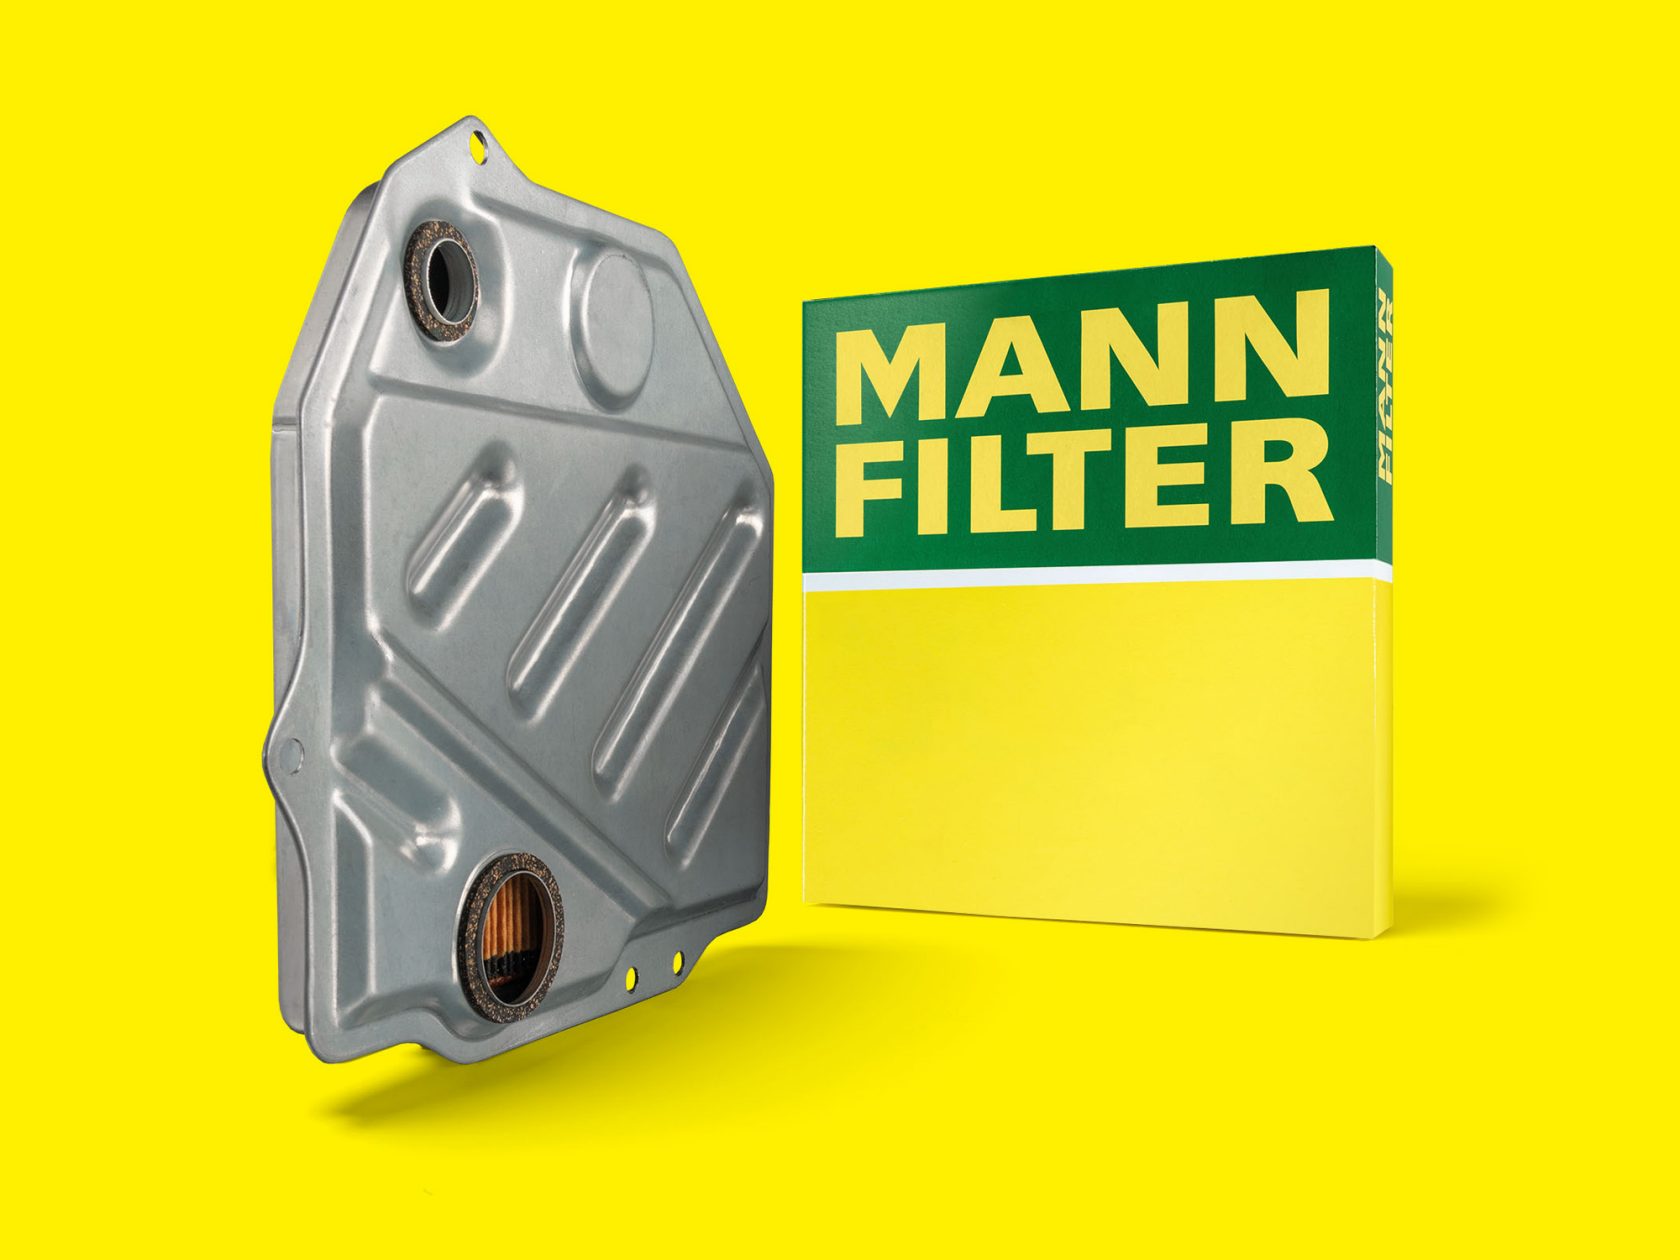 MANN-FILTER transmission oil filters protect sensitive transmission components from wear